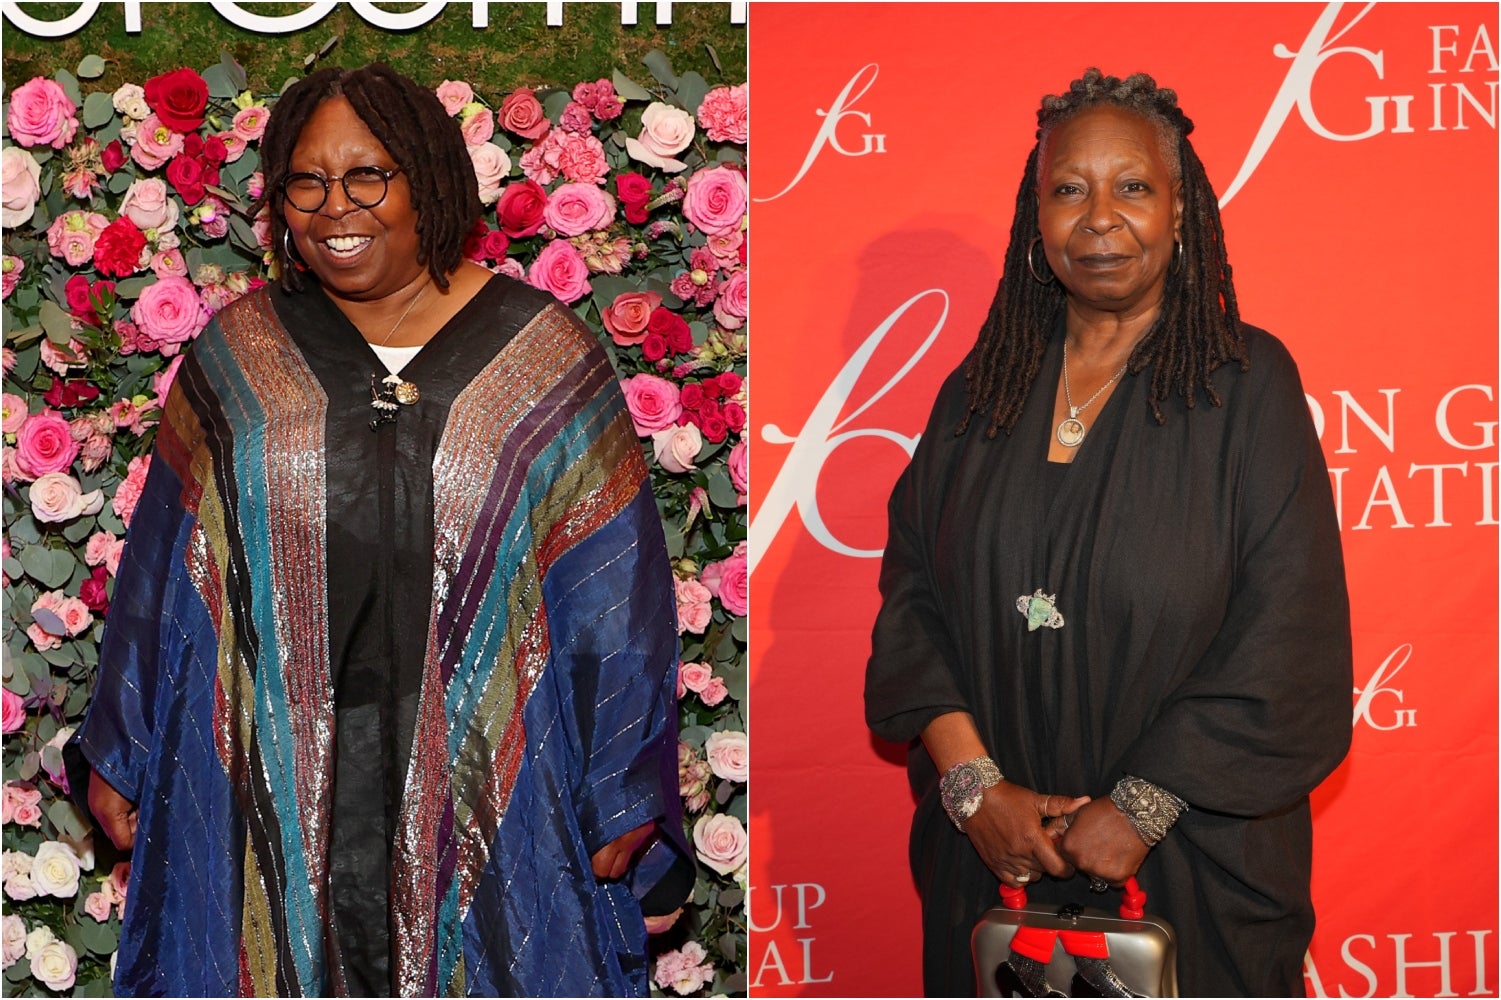 Whoopi Goldberg Reveals She Took Weight-Loss Drugs After Hitting 300 Pounds While Filming 'Till'